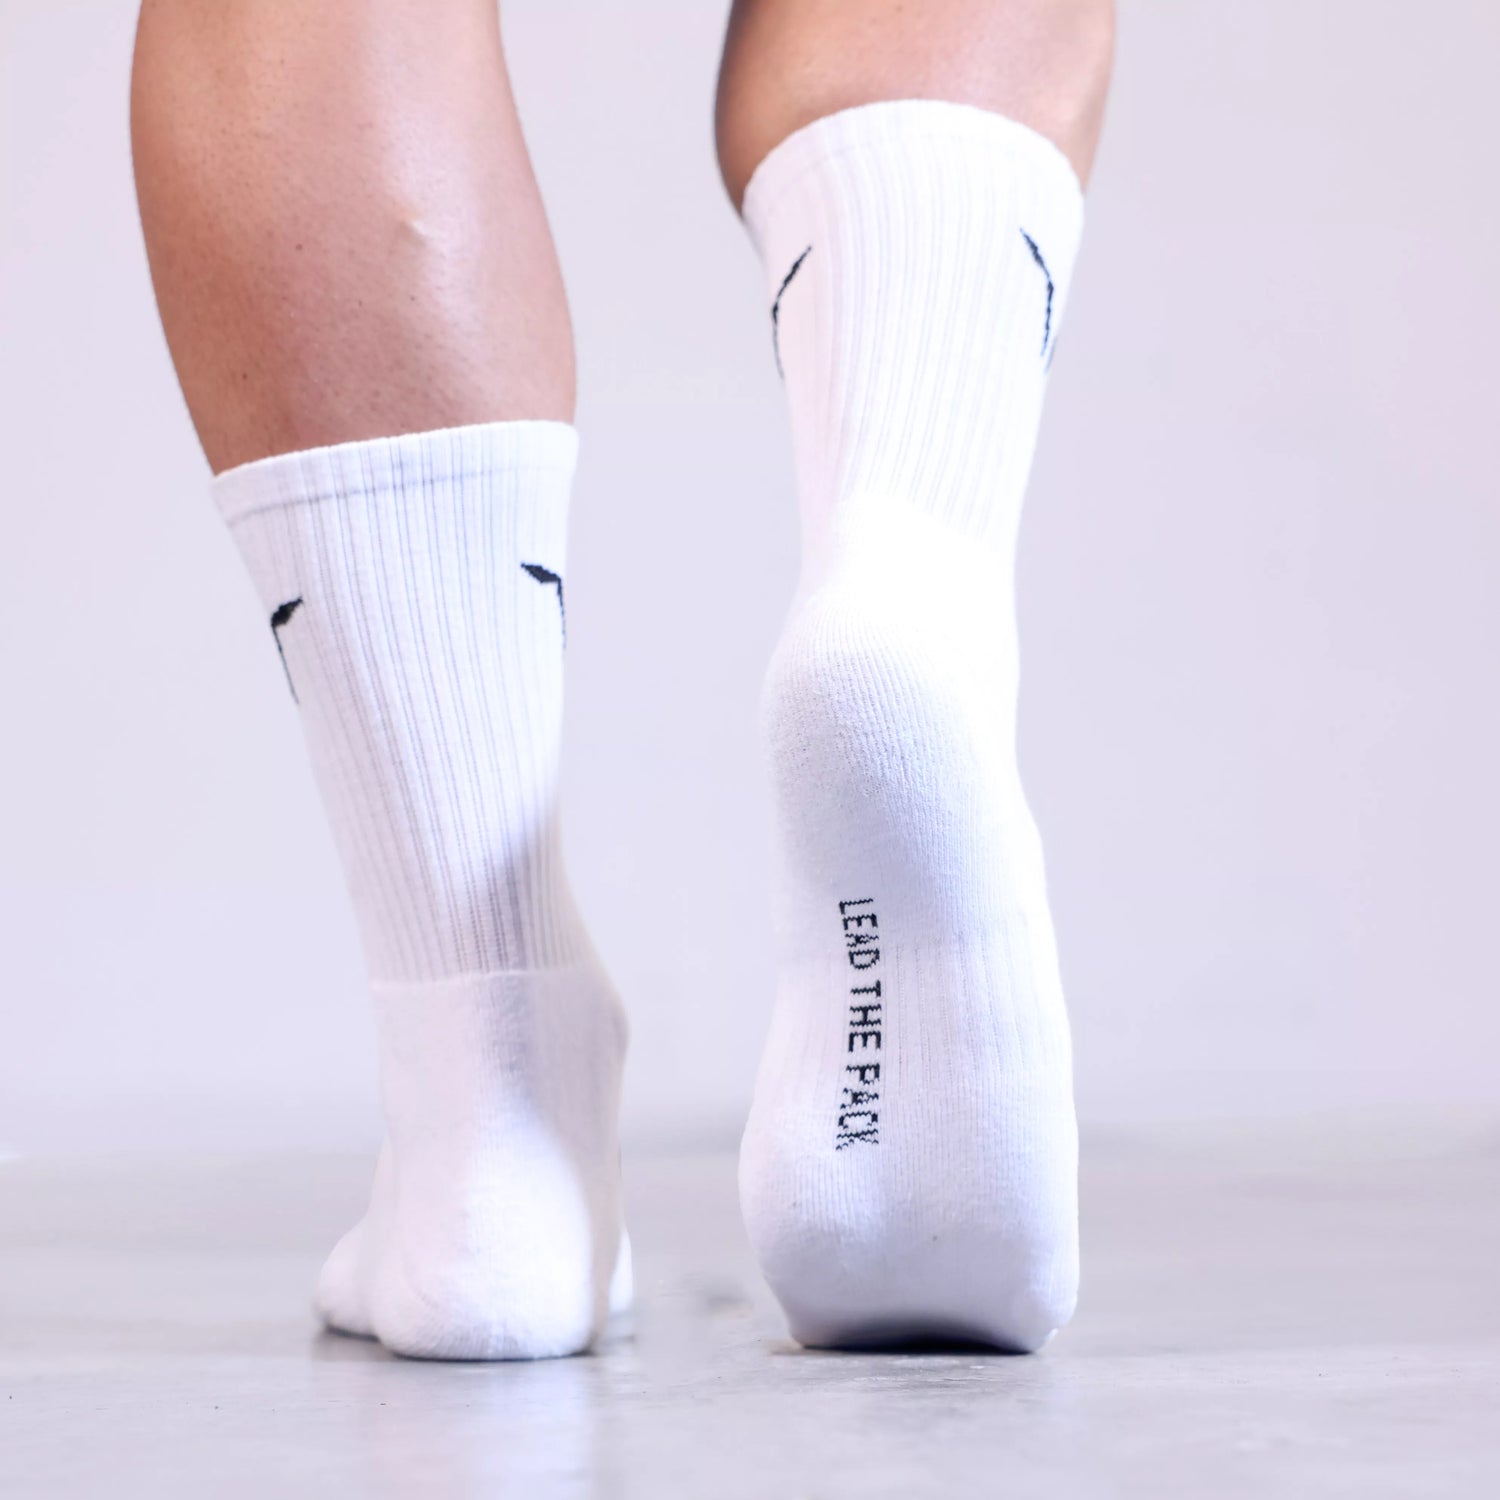 squatwolf-gym-wear-pack-of-3-core-crew-socks-white-workout